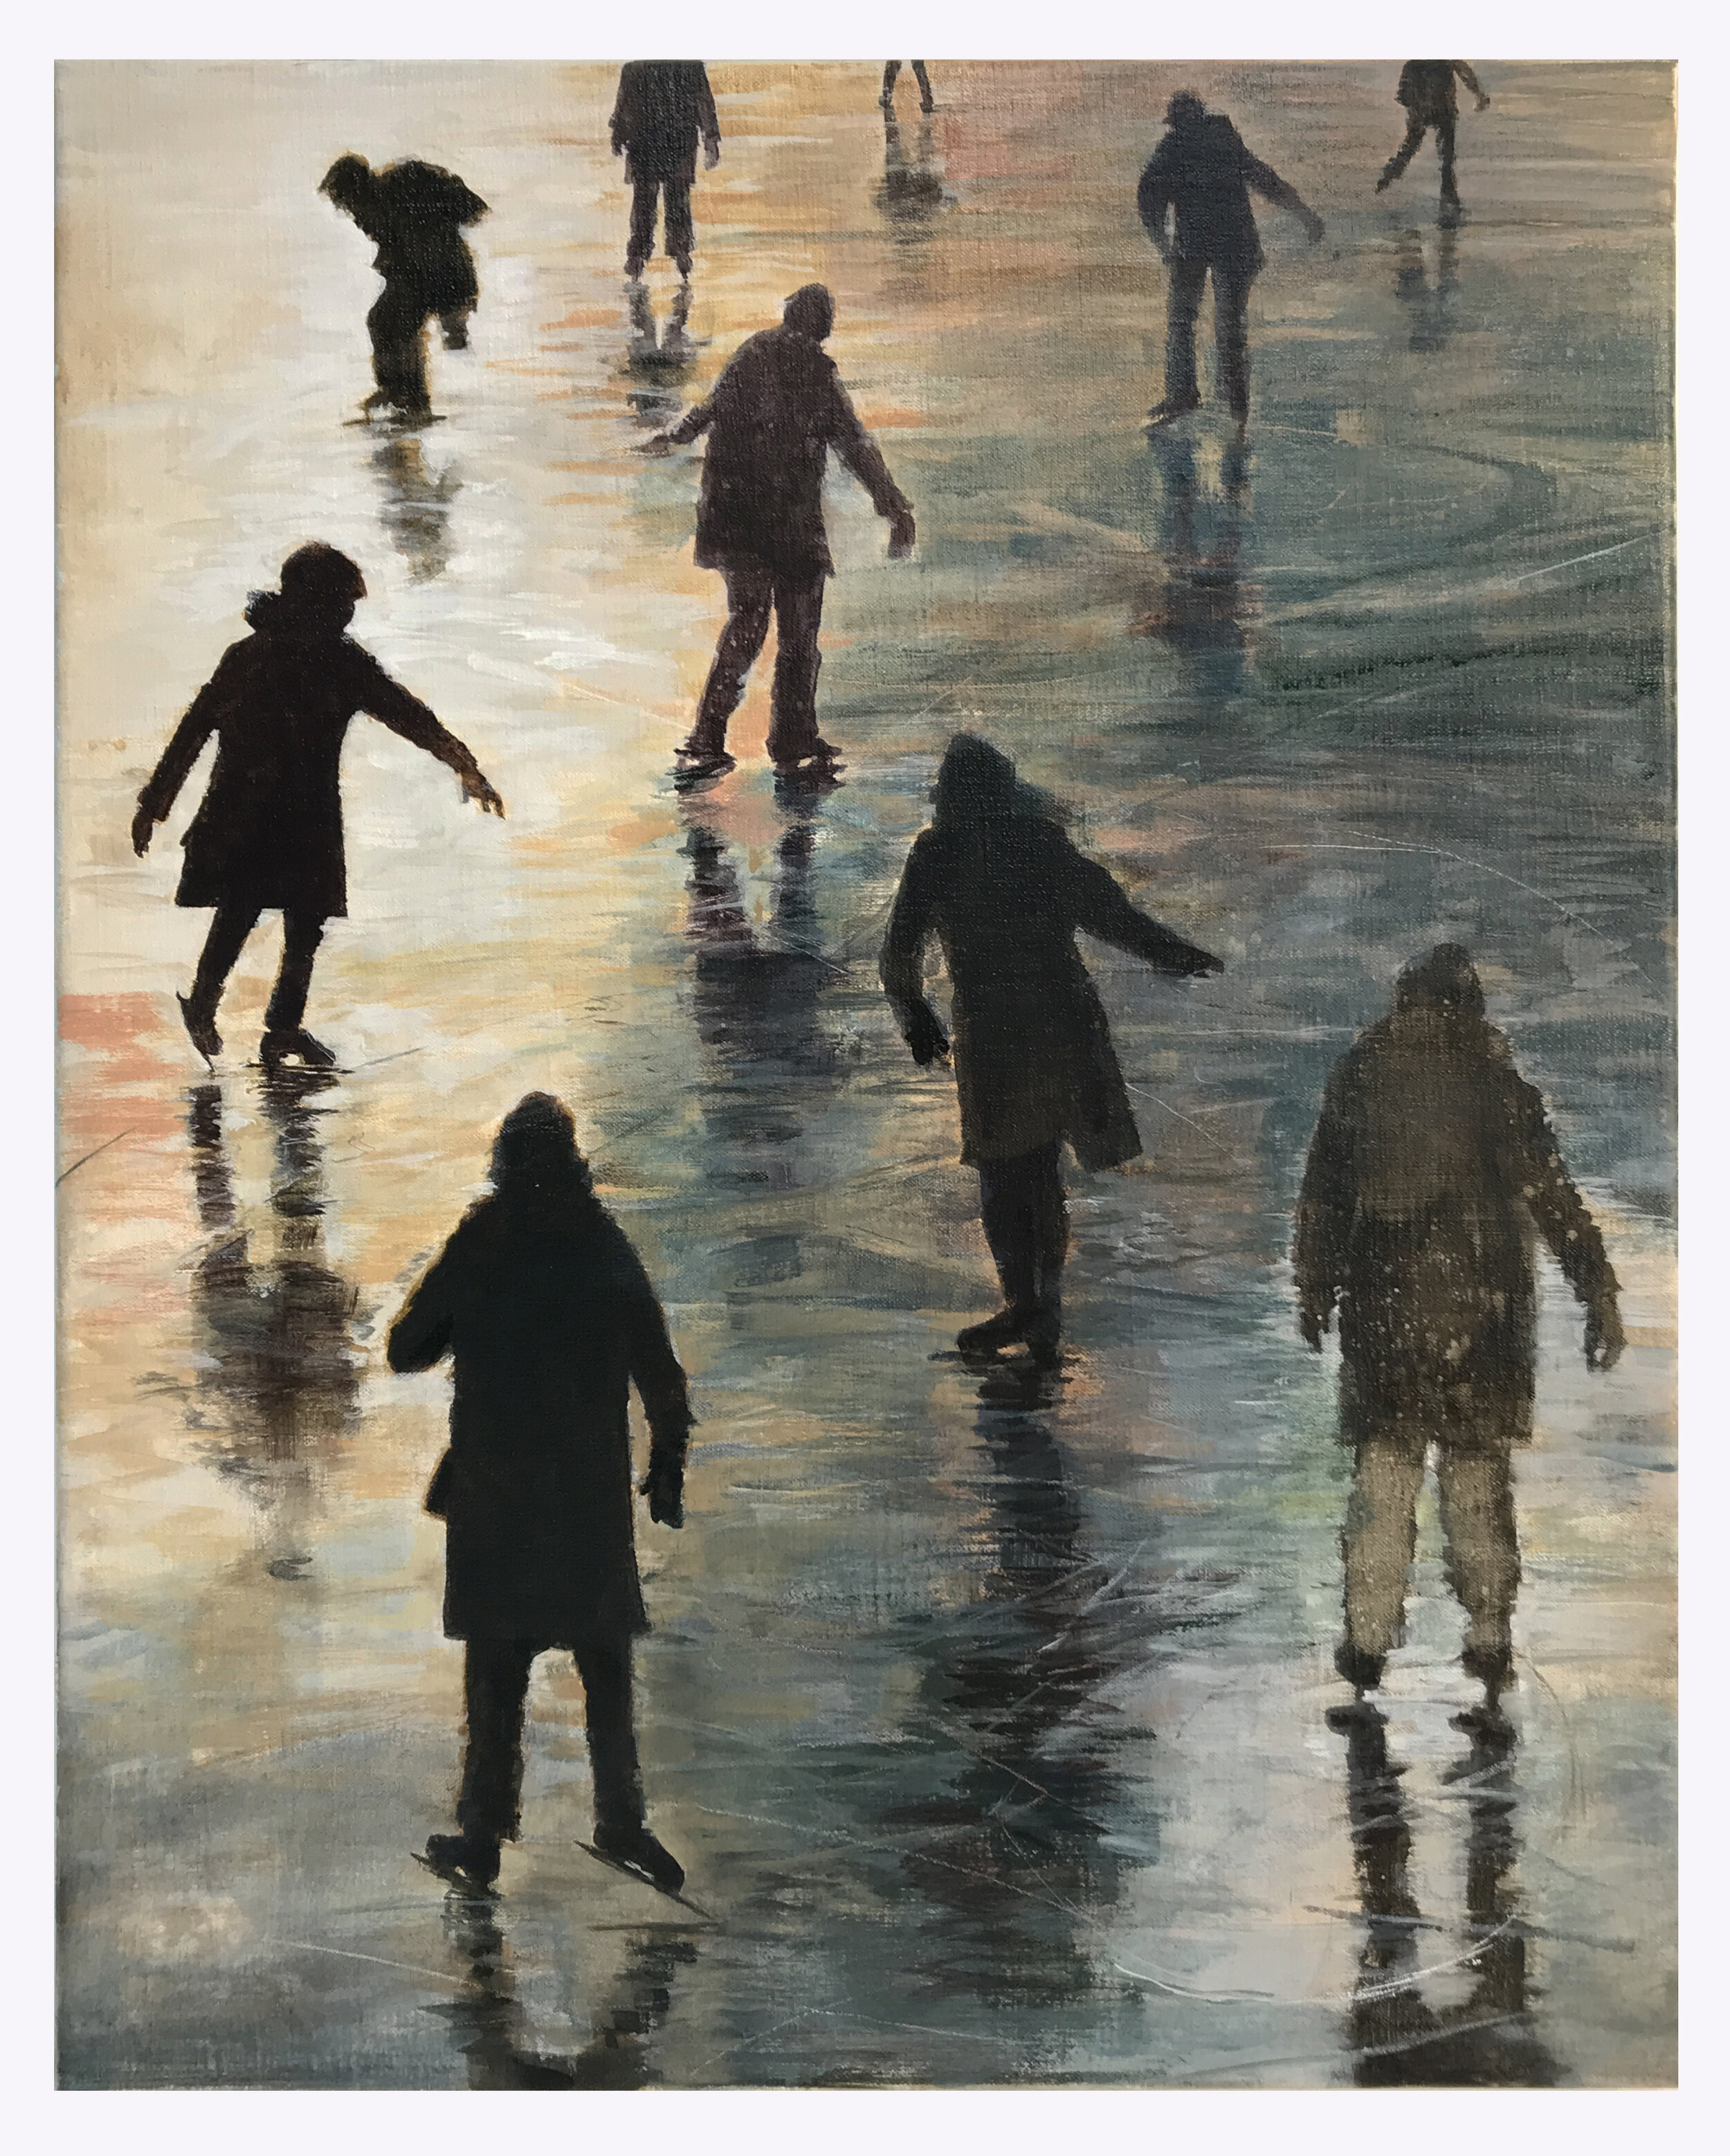  Skaters 3 24 x 19 inches (60 x 48 cm) Acrylic on linen 2021 